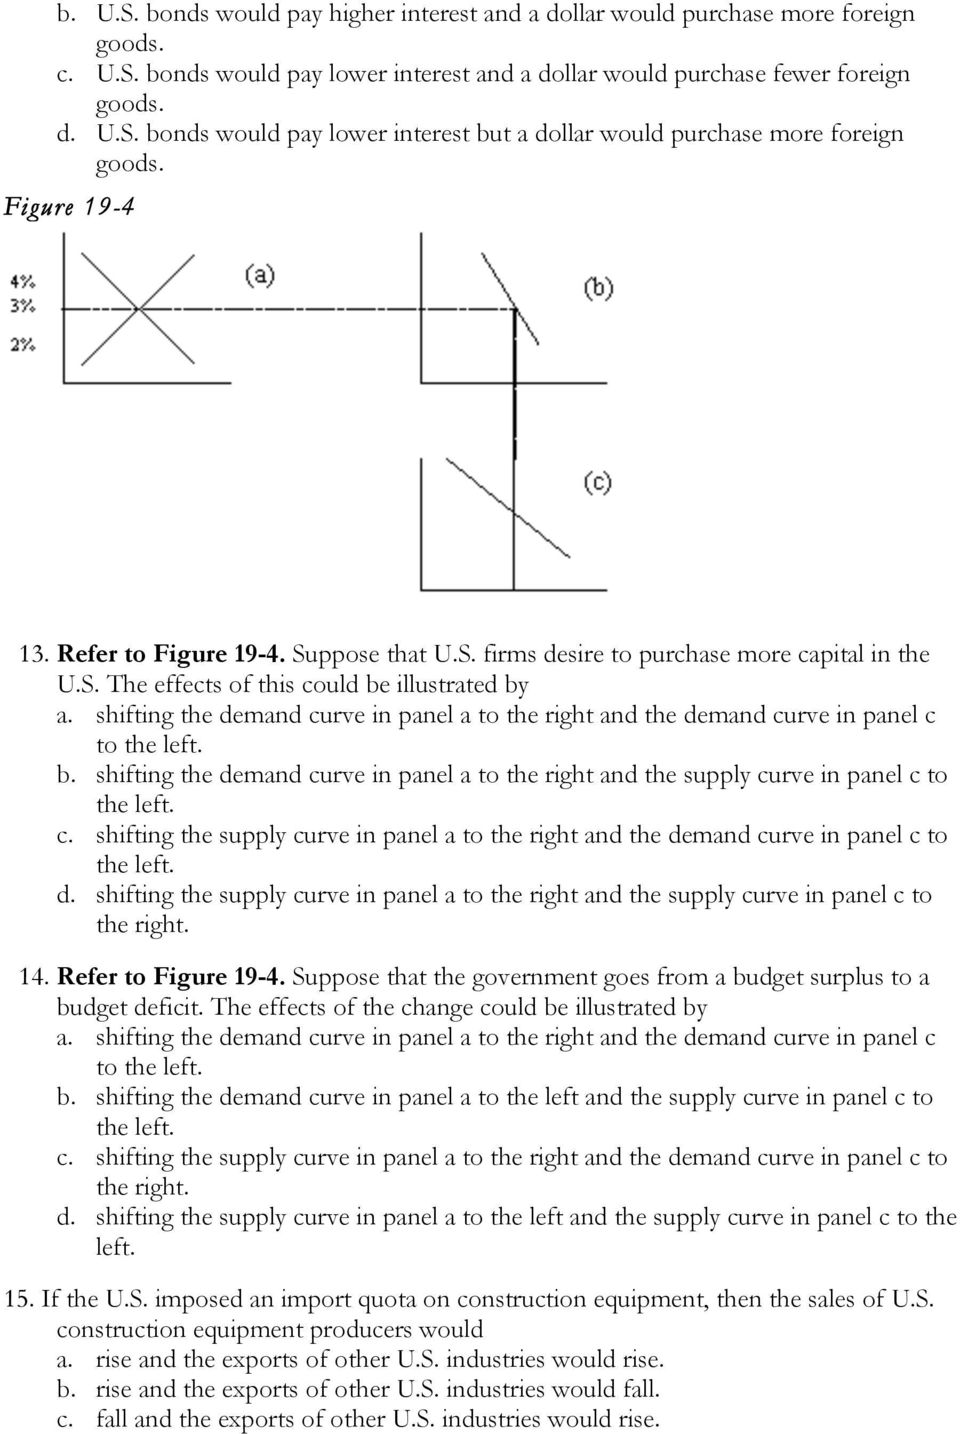 shifting the demand curve in panel a to the right and the demand curve in panel c to the left. b. shifting the demand curve in panel a to the right and the supply curve in panel c to the left. c. shifting the supply curve in panel a to the right and the demand curve in panel c to the left.